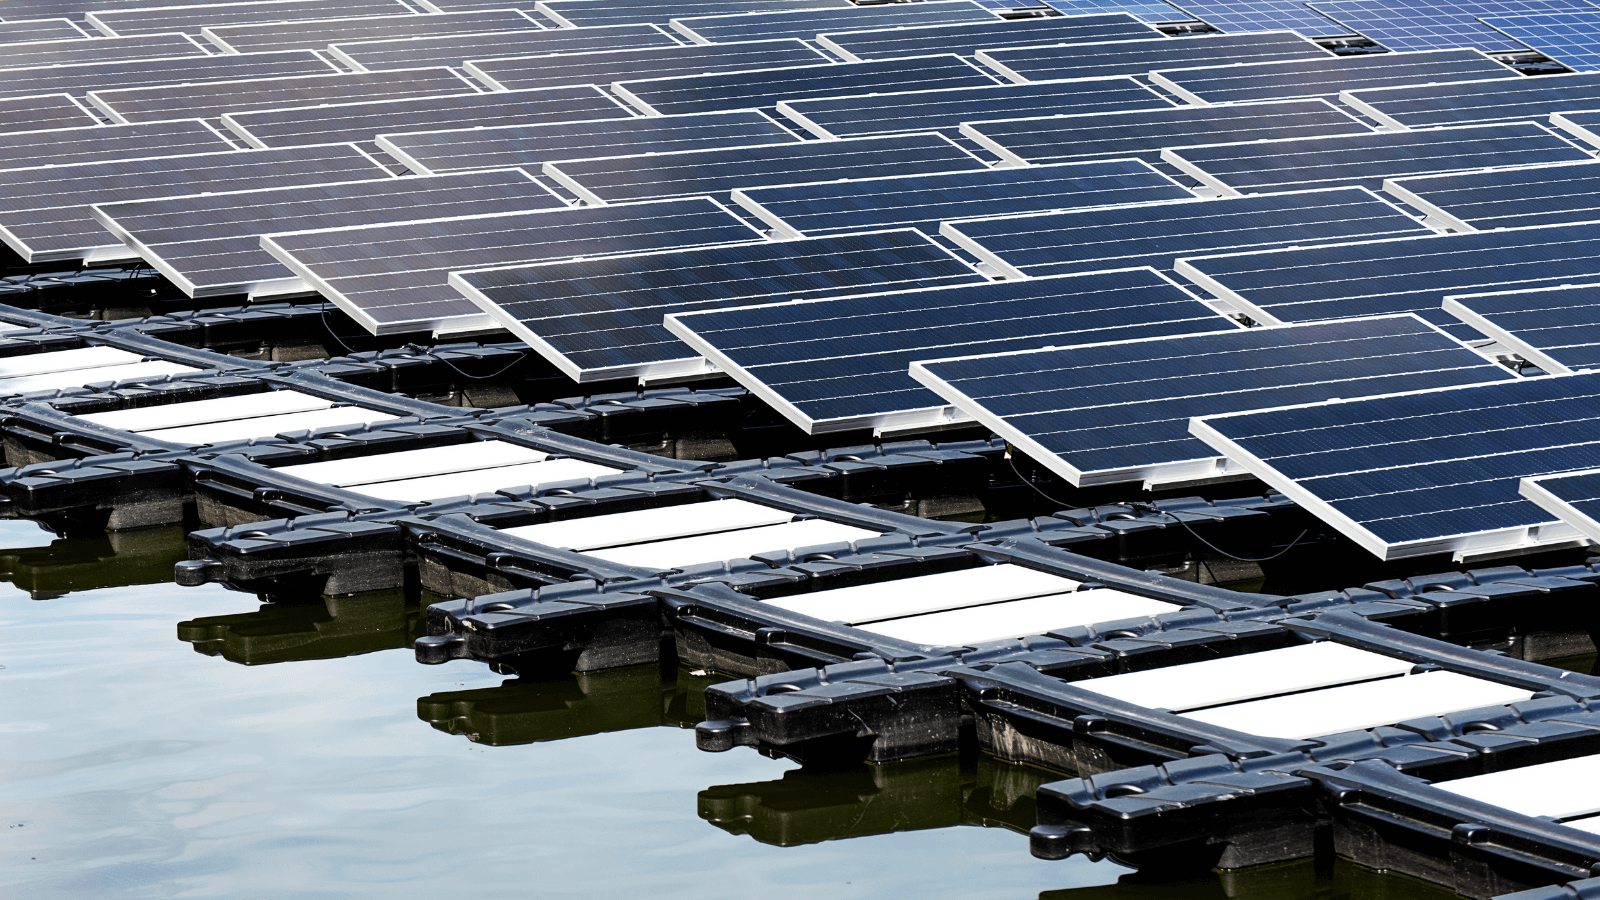 NHPC has signed a pact with the Green Energy Development Corporation of Odisha (GEDCOL) to form a joint venture (JV) for setting up 500 (MW) floating solar power projects in Odisha.